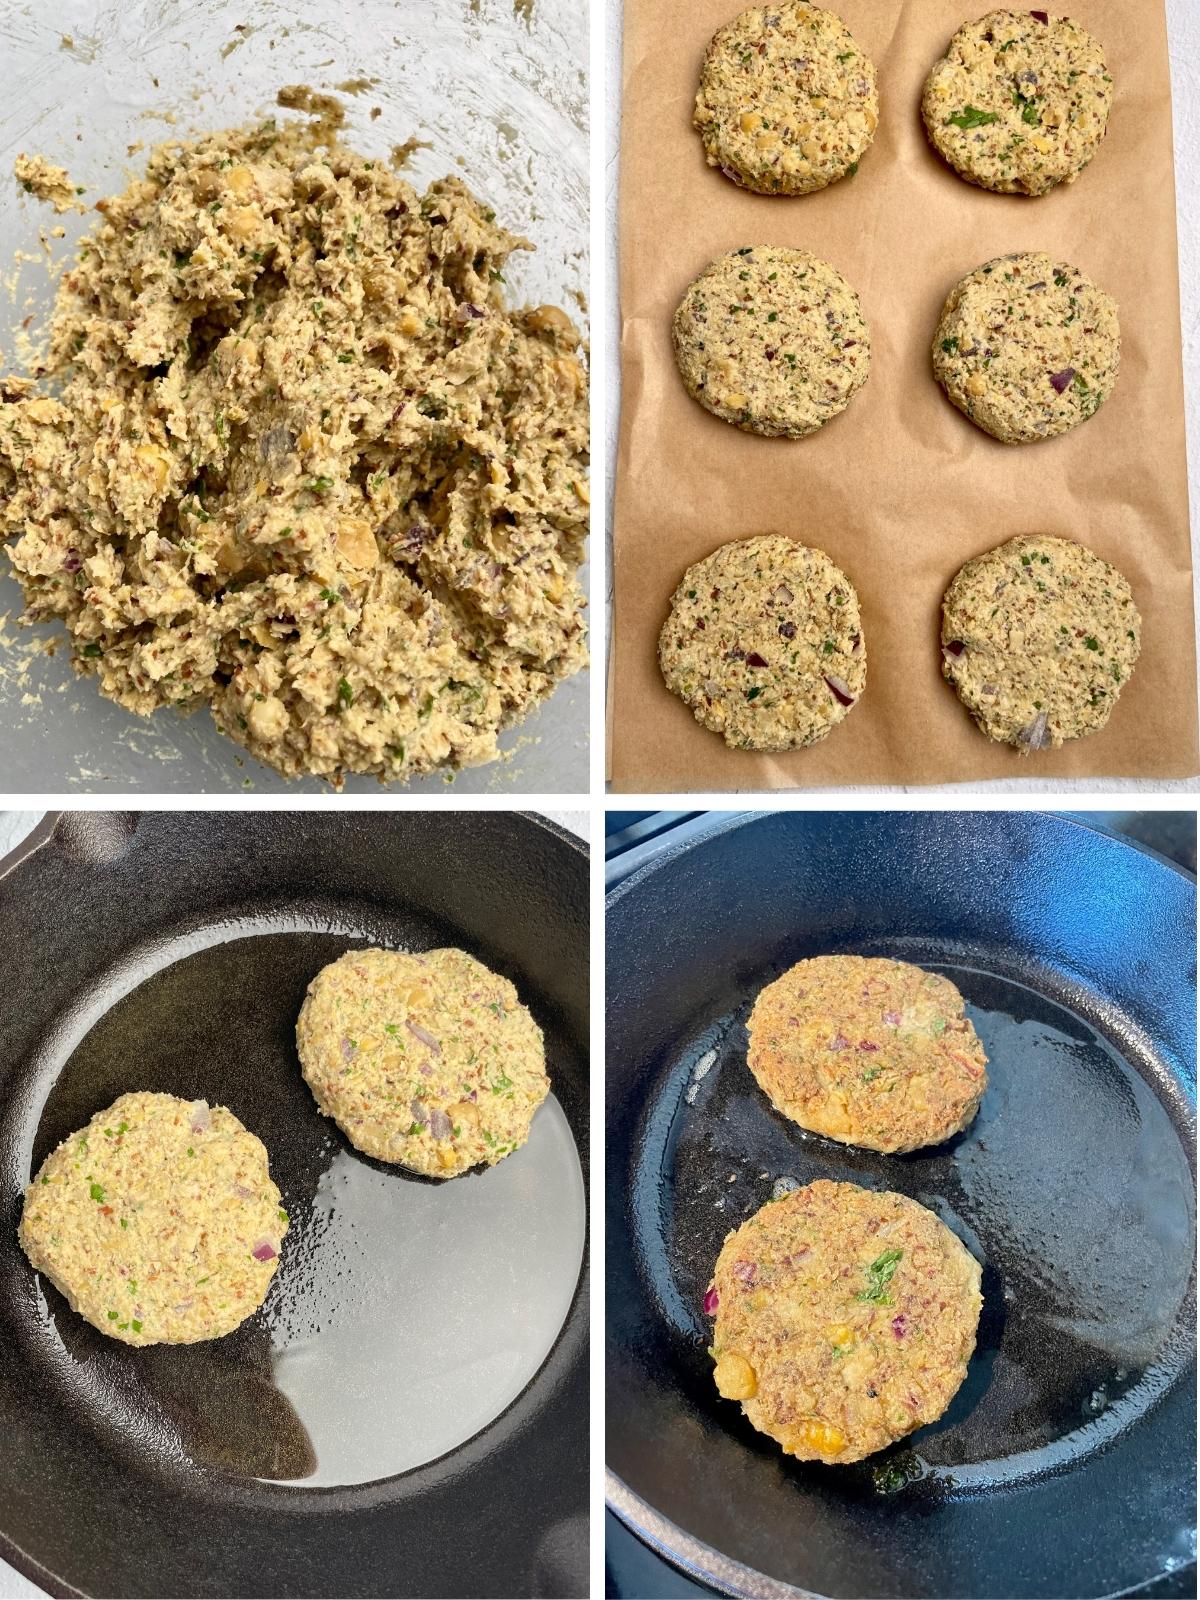 Process steps for chickpea patties.